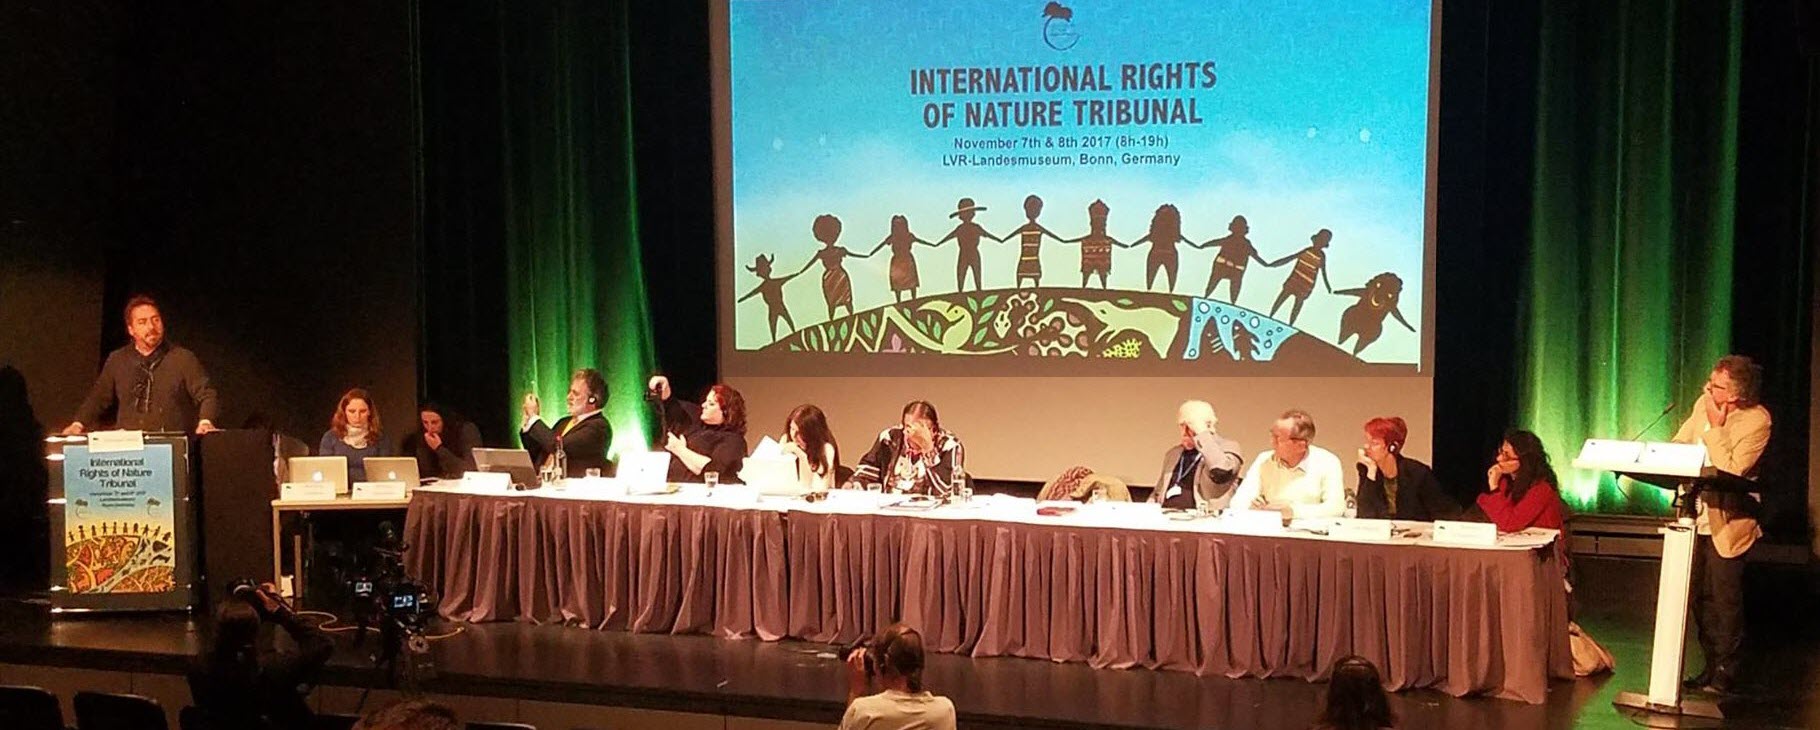 Press Release: Cases at the International Rights of Nature Tribunal in Bonn